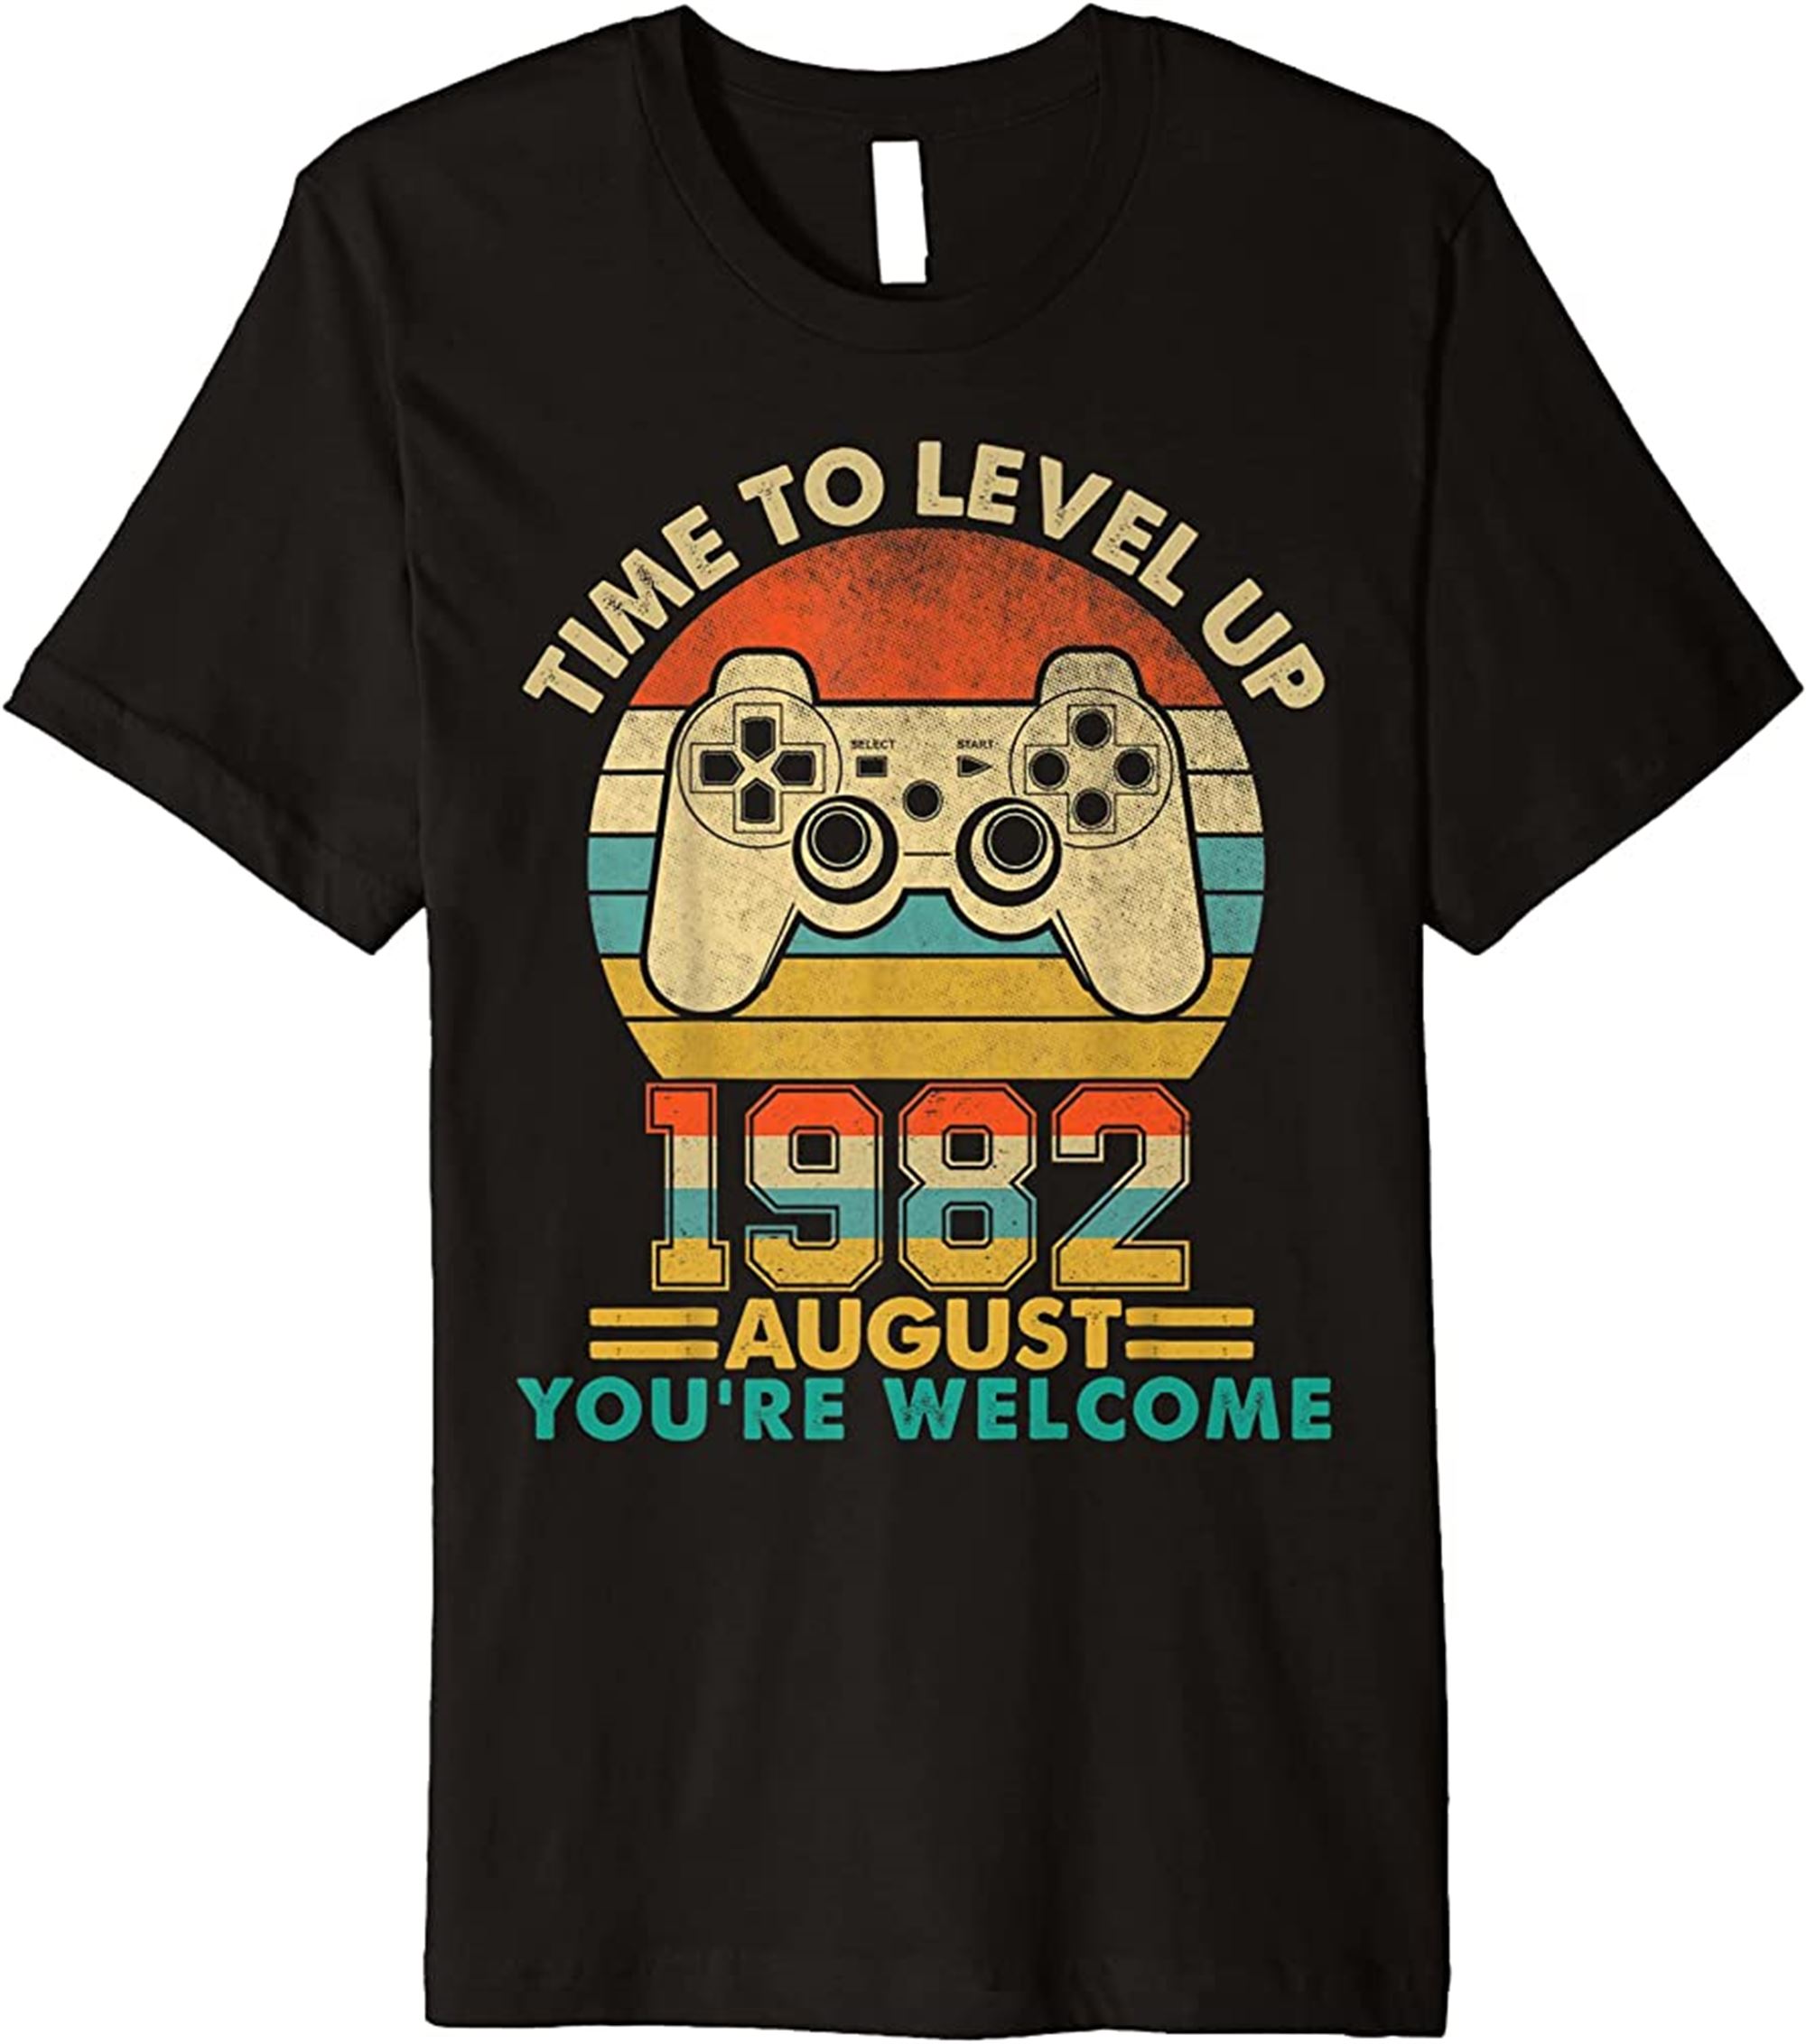 Vintage 1982 August 40 Years Old Video Gamer 40th Birthday Premium T-shirt Plus Size Up To 5xl